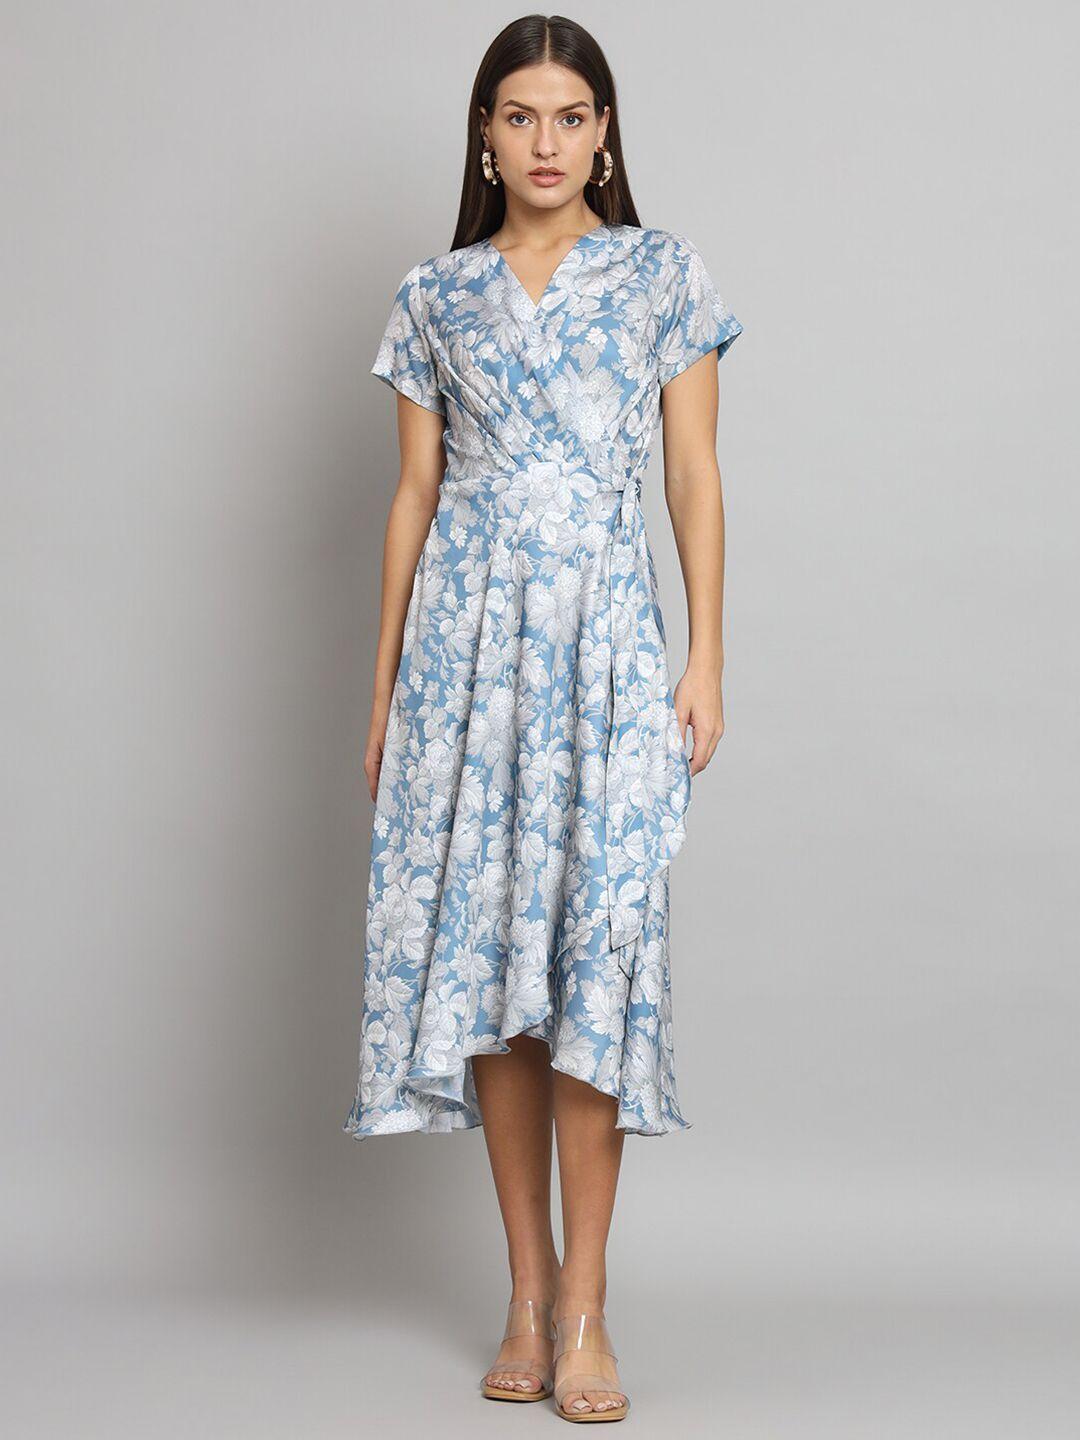 powersutra-floral-printed-fit-&-flare-wrap-midi-dress